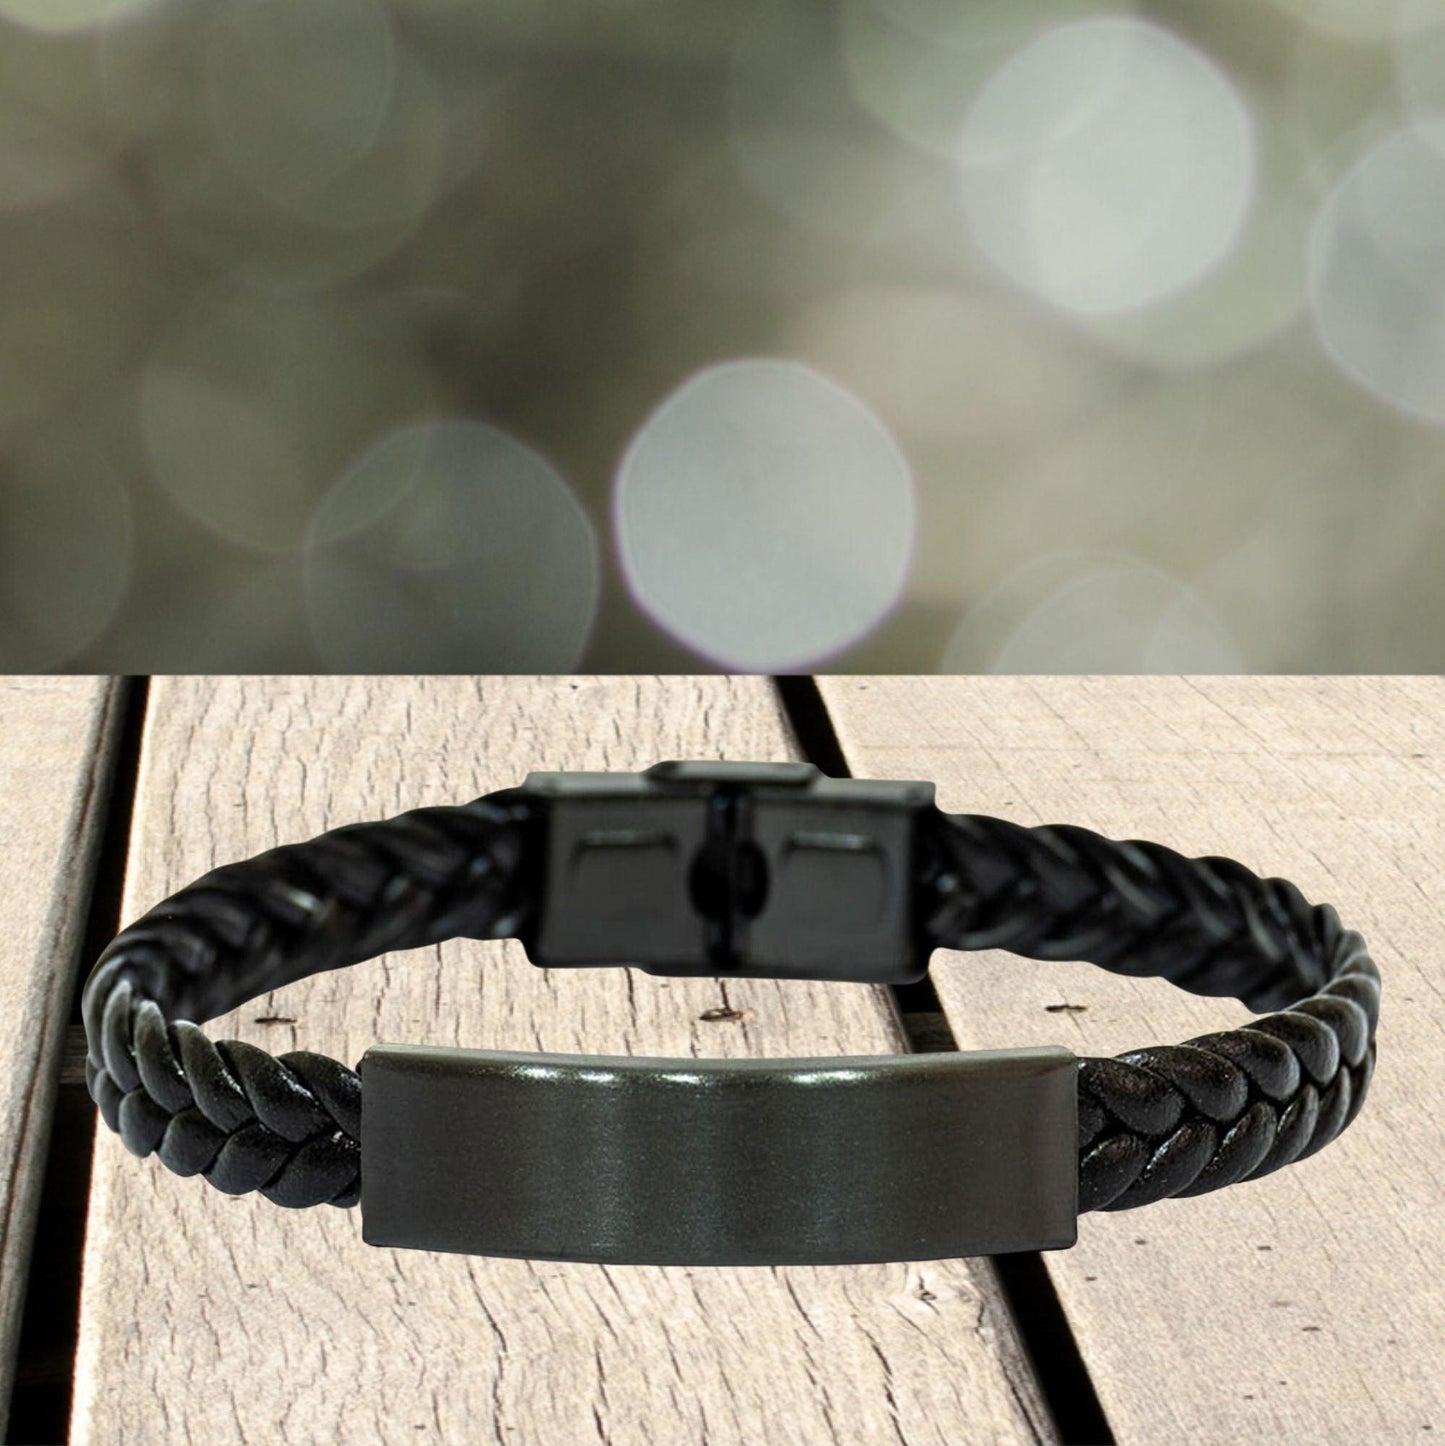 Aunt Christmas Perfect Gifts, Aunt Braided Leather Bracelet, Motivational Aunt Engraved Gifts, Birthday Gifts For Aunt, To My Aunt Life is learning to dance in the rain, finding good in each day. I'm always with you - Mallard Moon Gift Shop